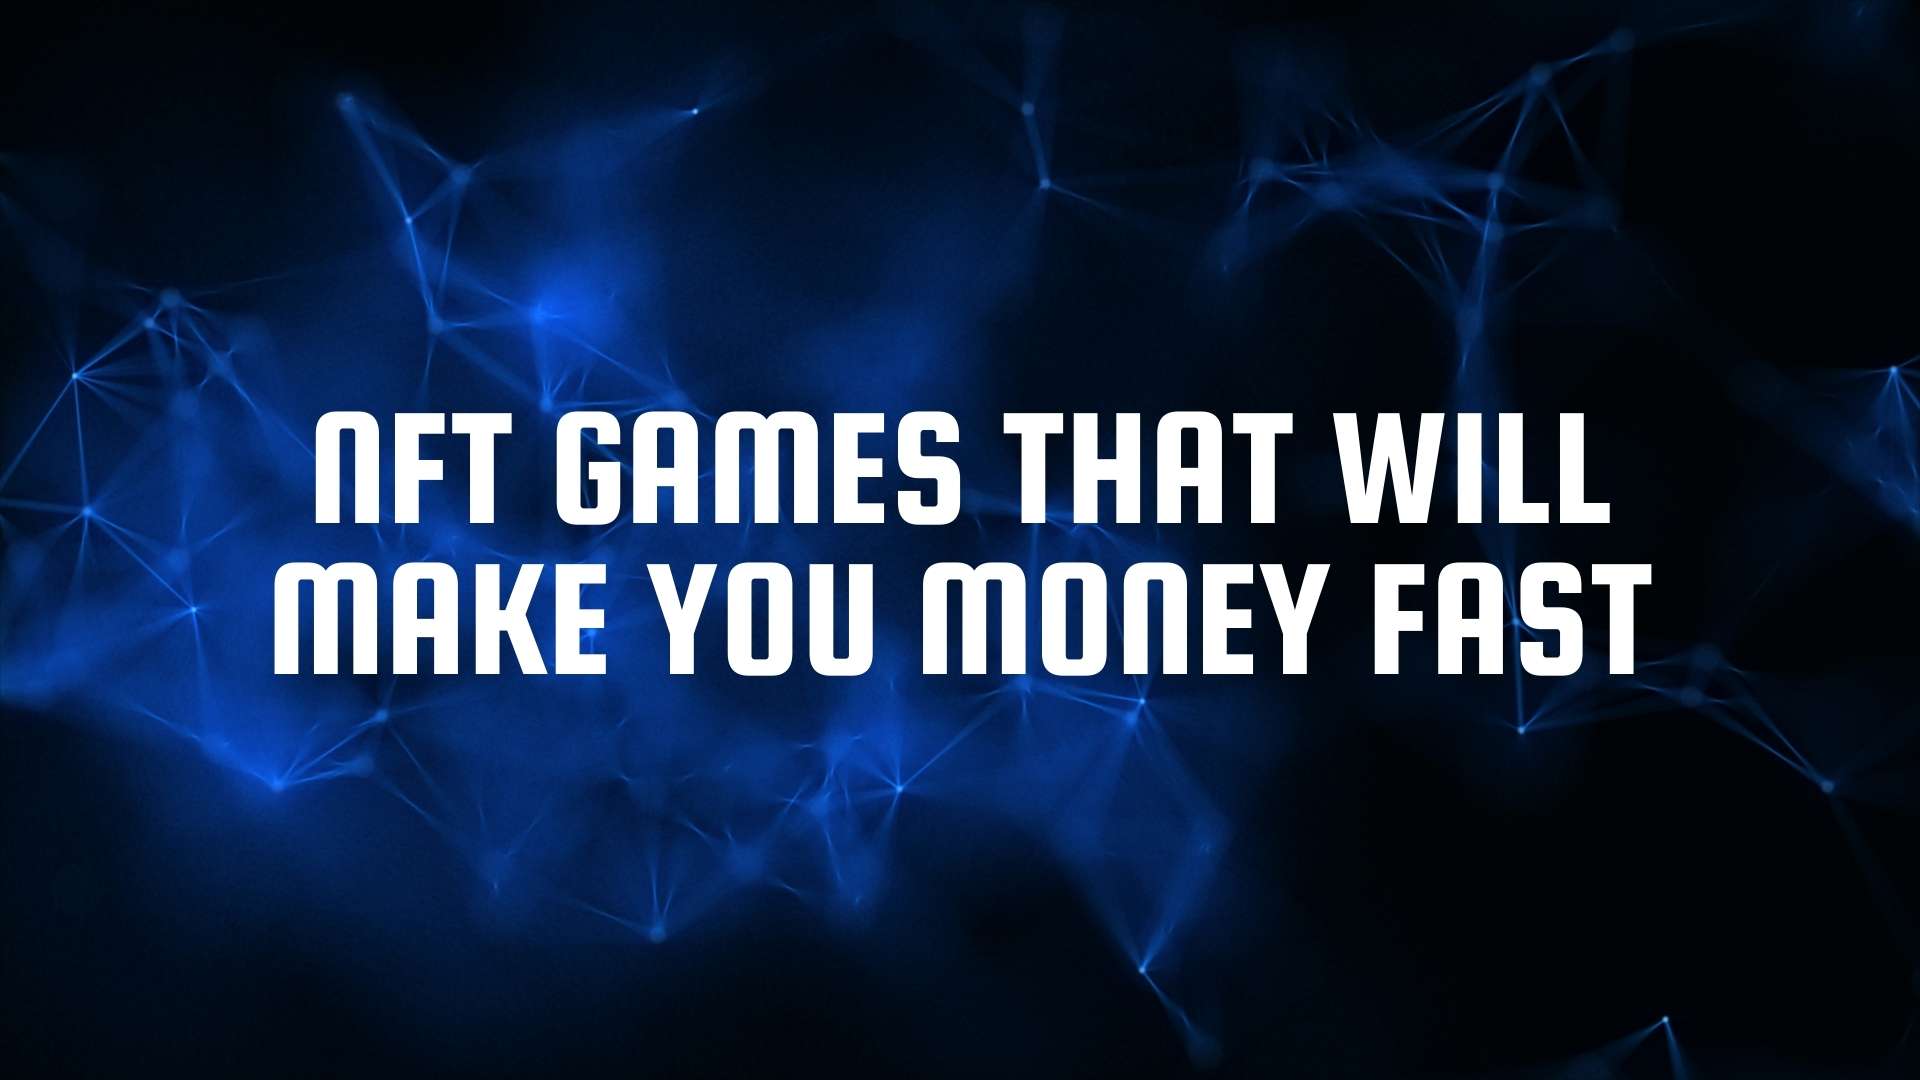 NFT games that will make you money fast